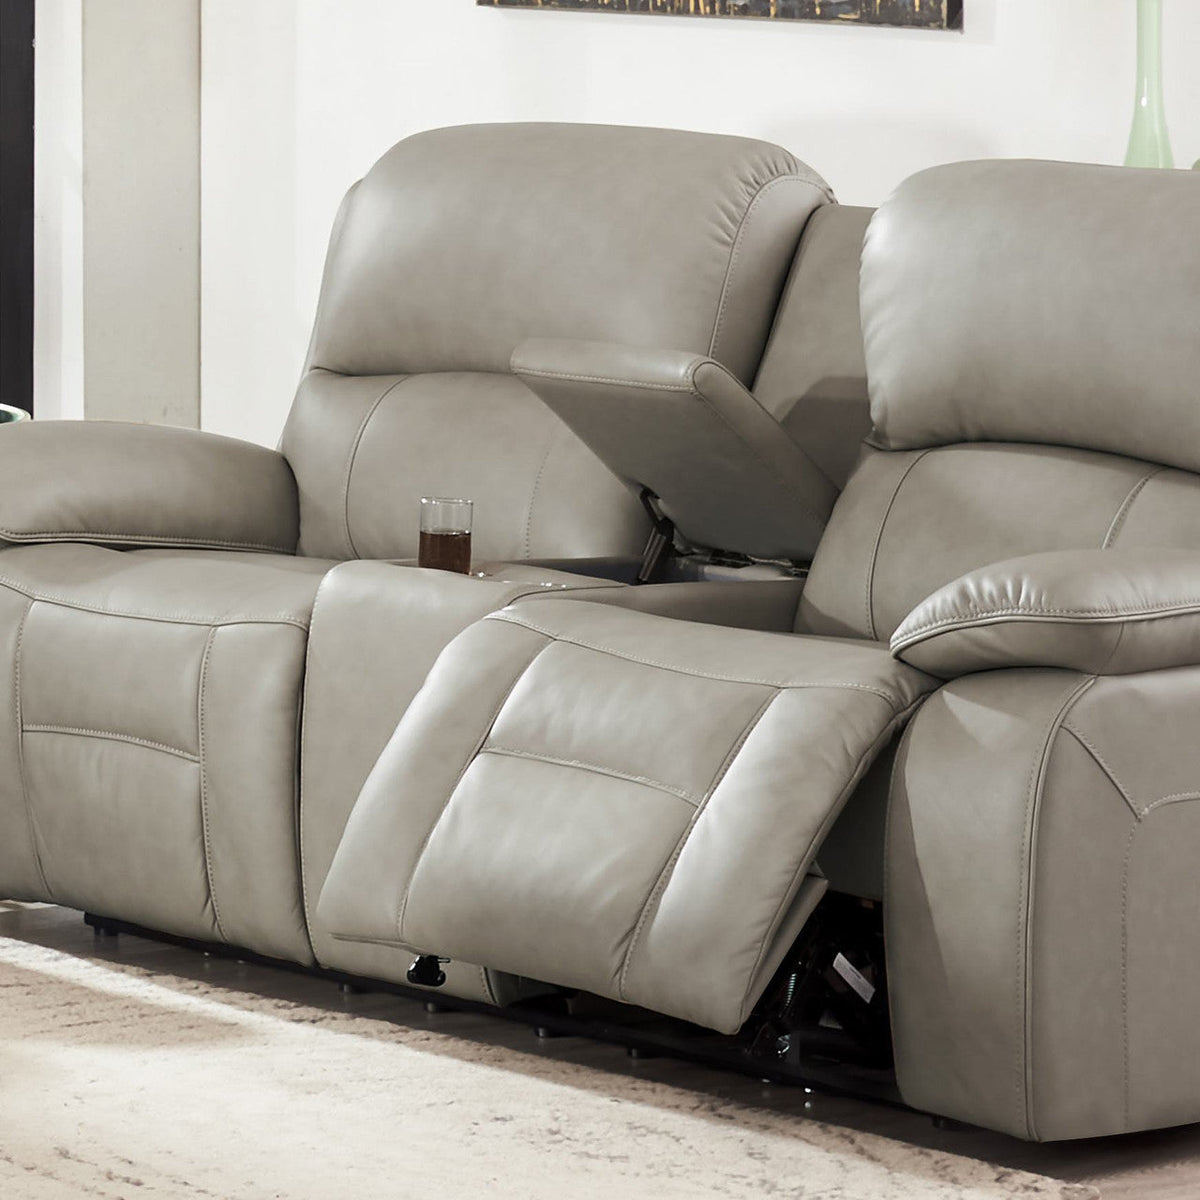 Westminster Leather Reclining Sofa Collection - MJM Furniture